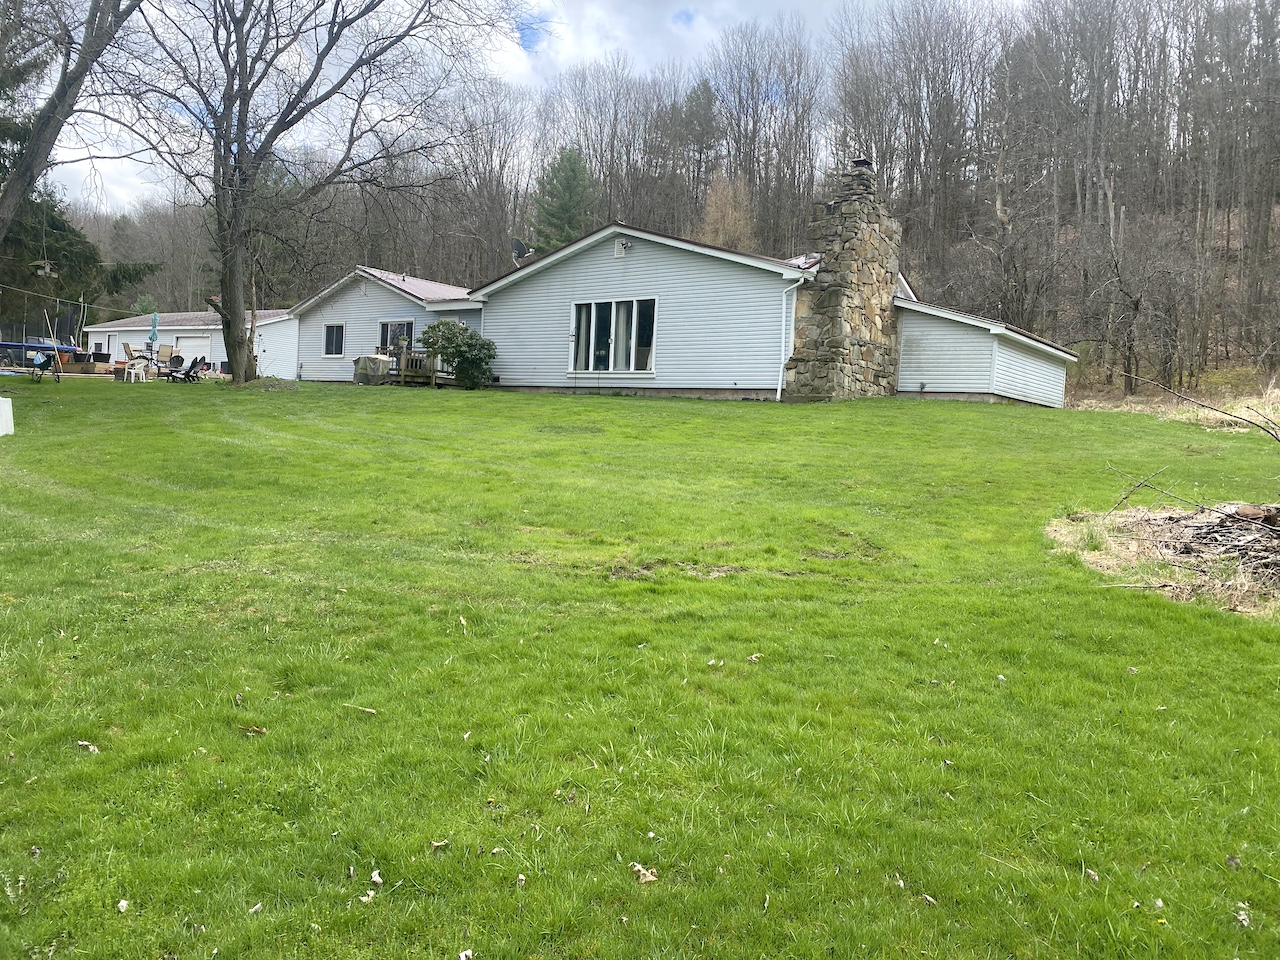 Country Home with Garage and Pond on 4 acres in West Almond NY 3595 County Road 2